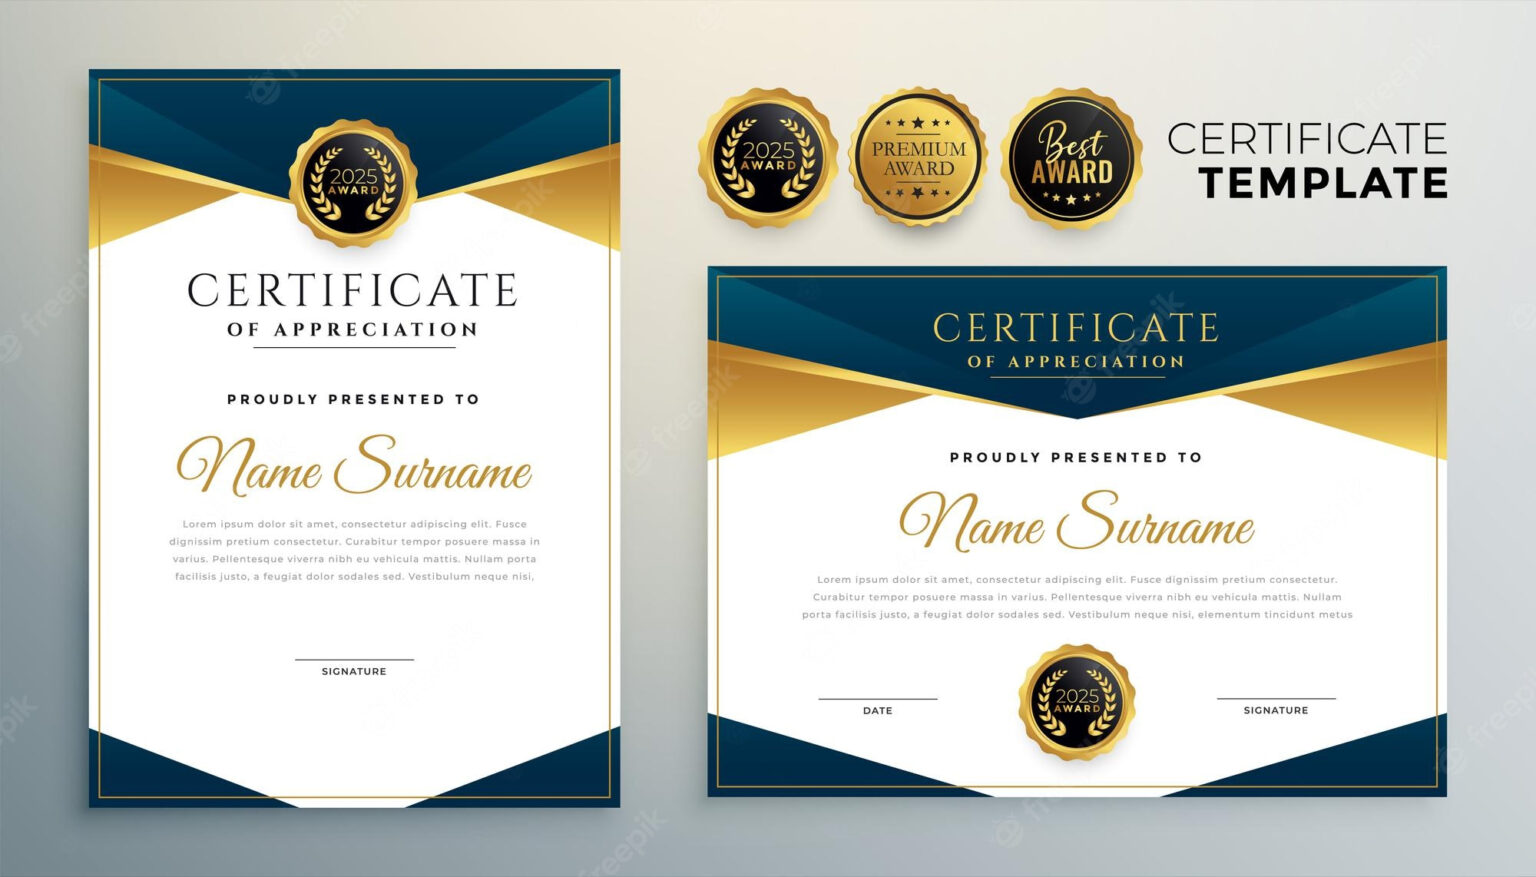 certificate-images-free-download-on-freepik-with-high-resolution